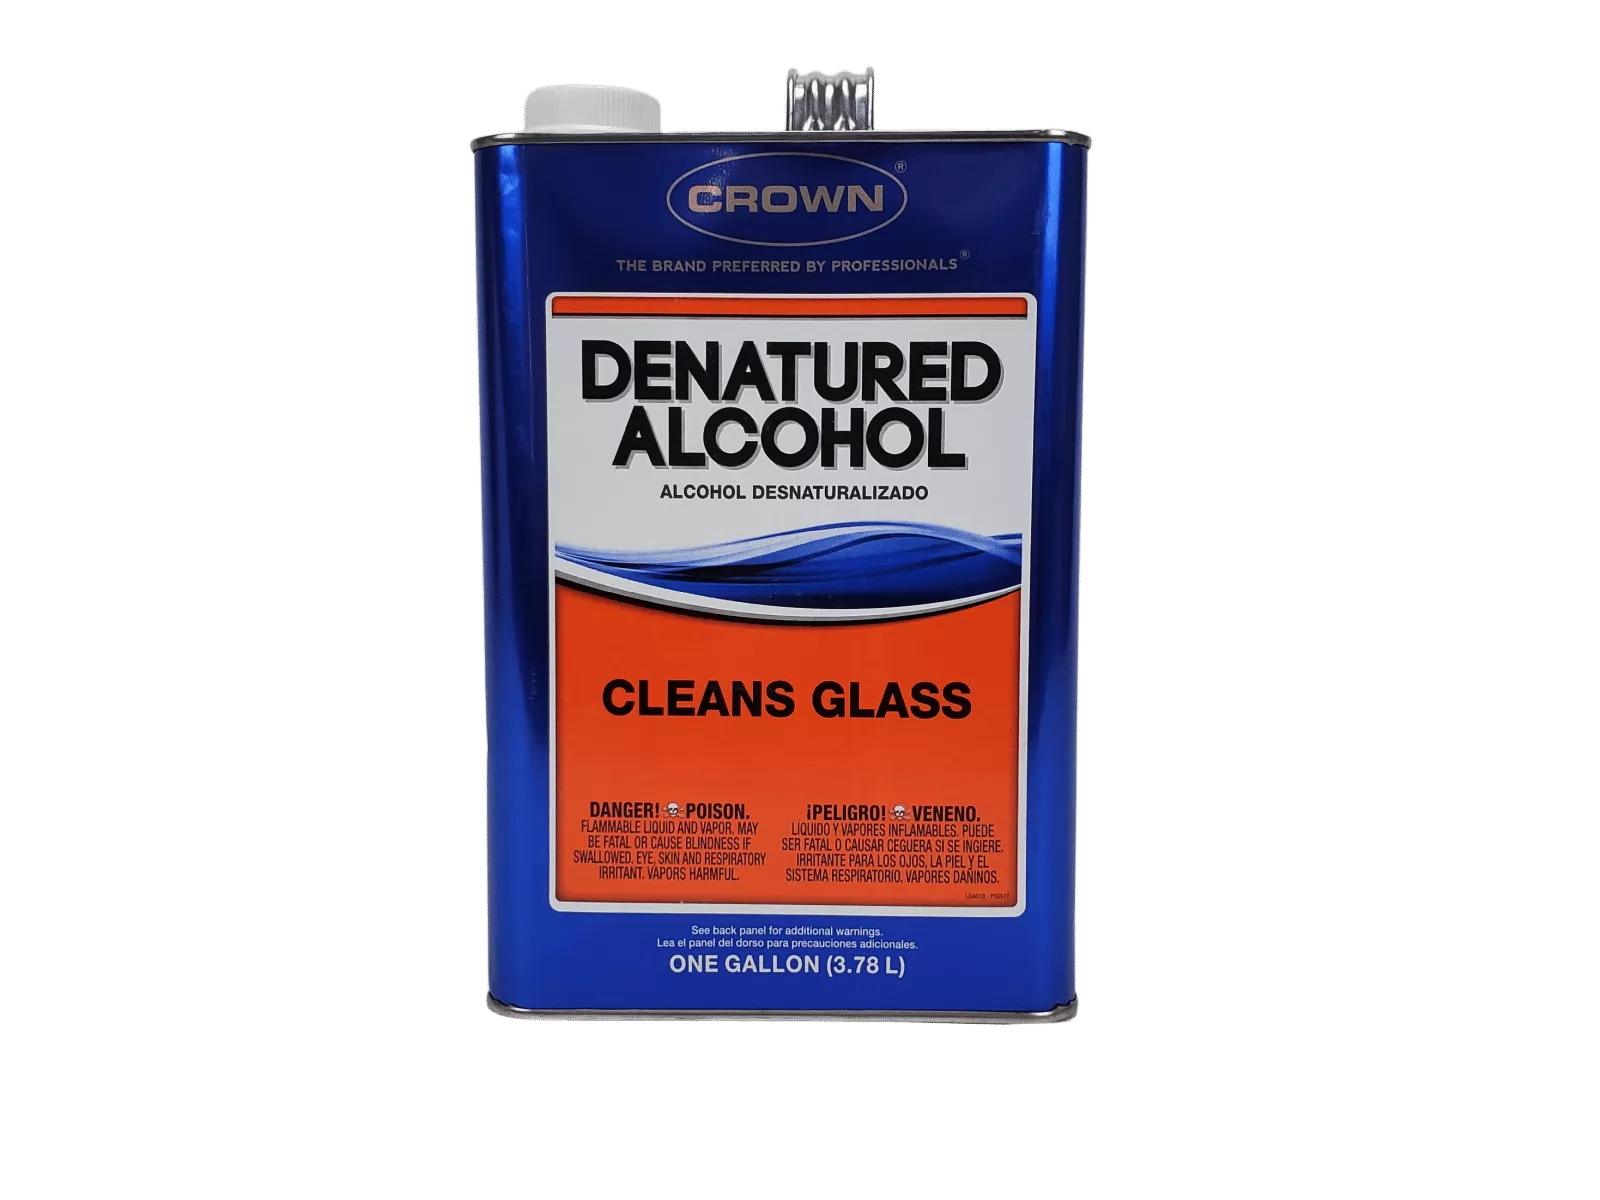 Blue and orange one-gallon container of Crown Denatured Alcohol, a specialized cleaning solution labeled "Cleans Glass".